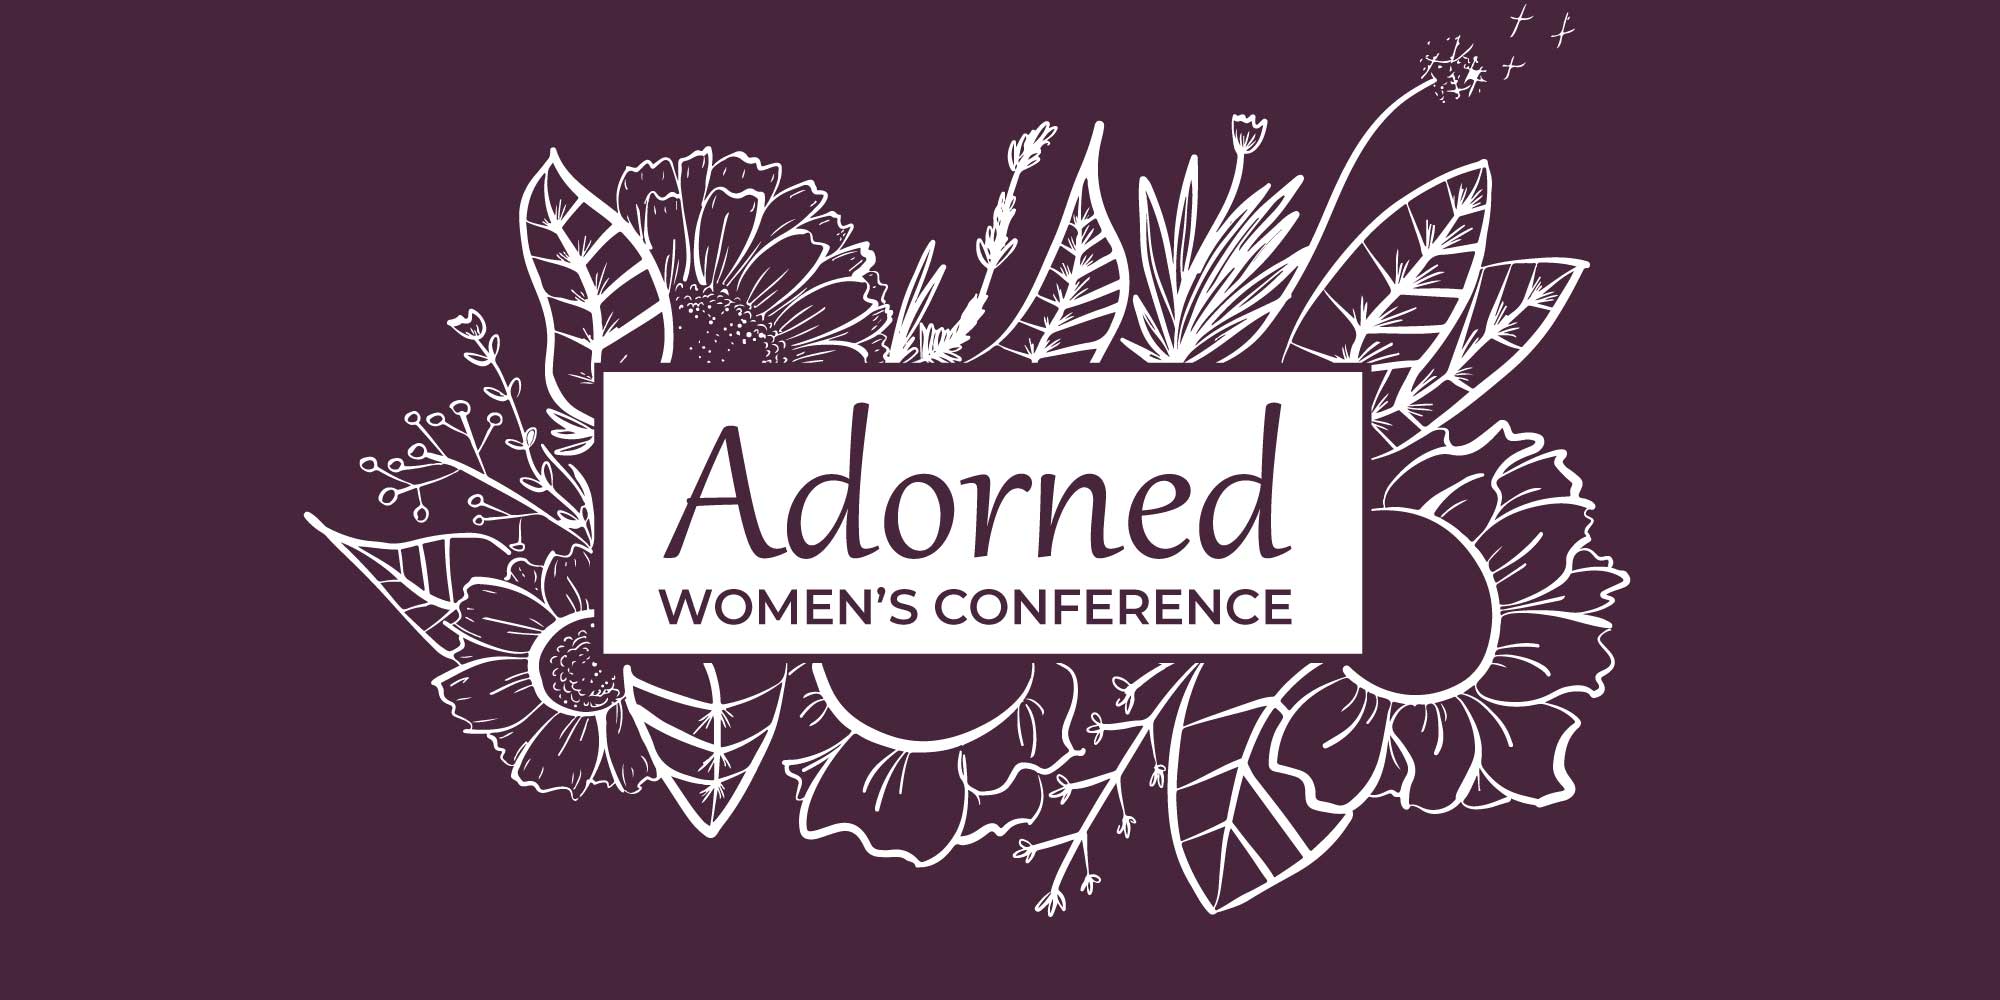 Adorned Women's Conference